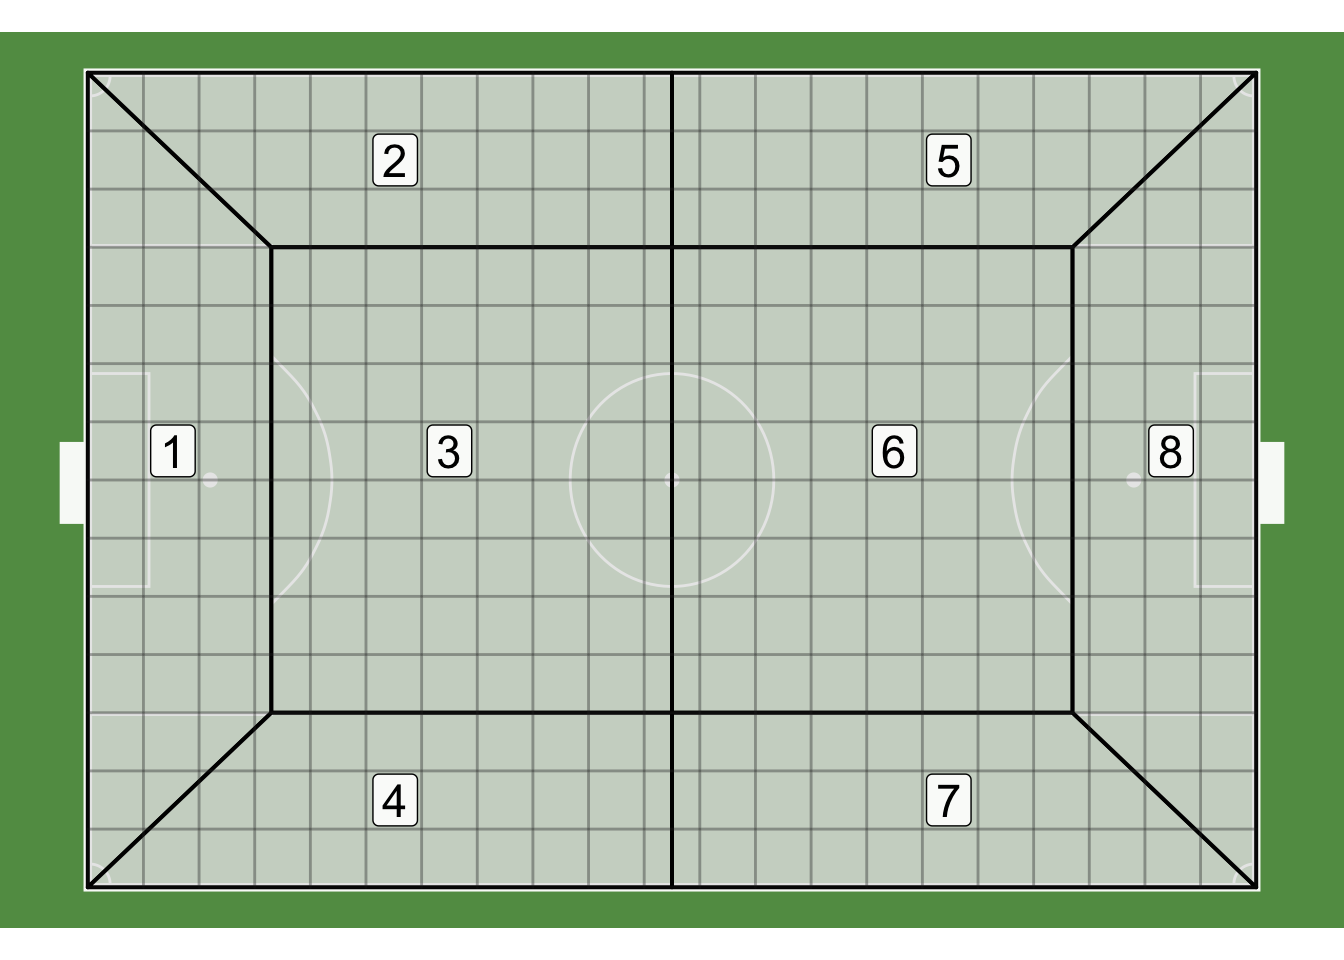 Plot of the 294 polygrids and 8 zones overlaid on the pitch. The grey lines represent the polygrids and black borders represent the boundaries of the 8 zones.